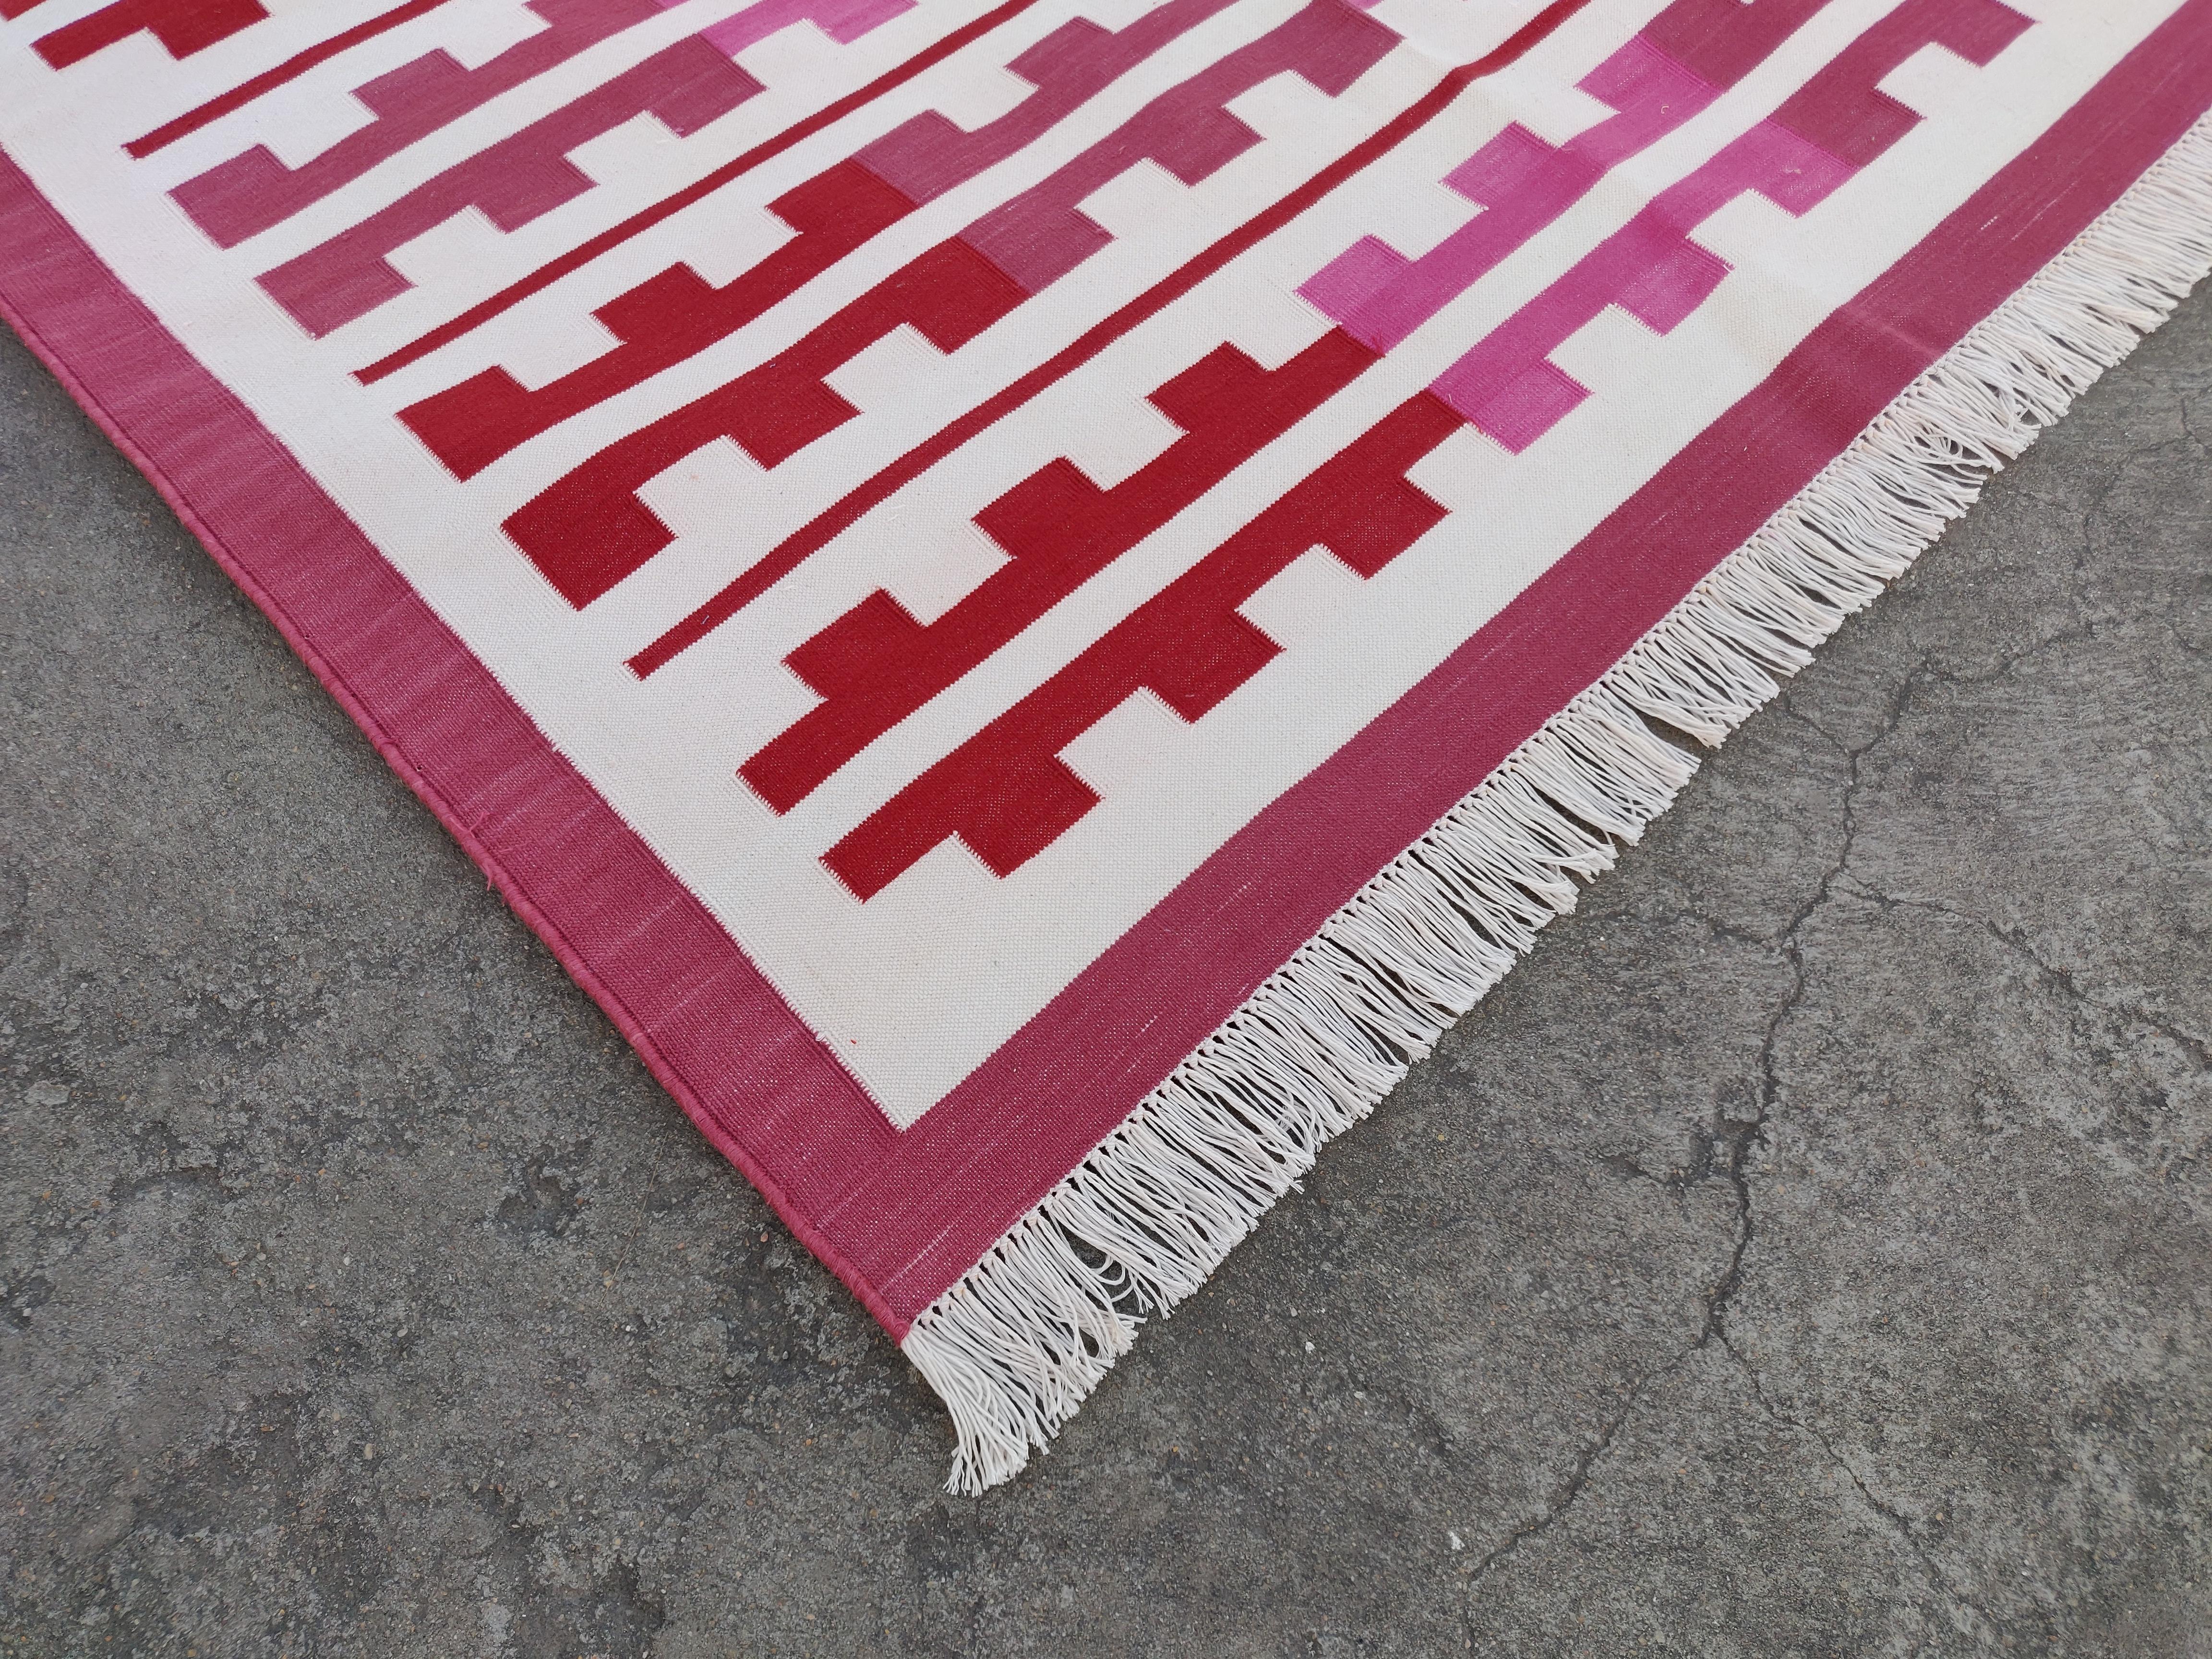 Cotton Natural Vegetable Dyed, Red & Cream Marianne Striped Rug-8'x10'
These special flat-weave dhurries are hand-woven with 15 ply 100% cotton yarn. Due to the special manufacturing techniques used to create our rugs, the size and color of each